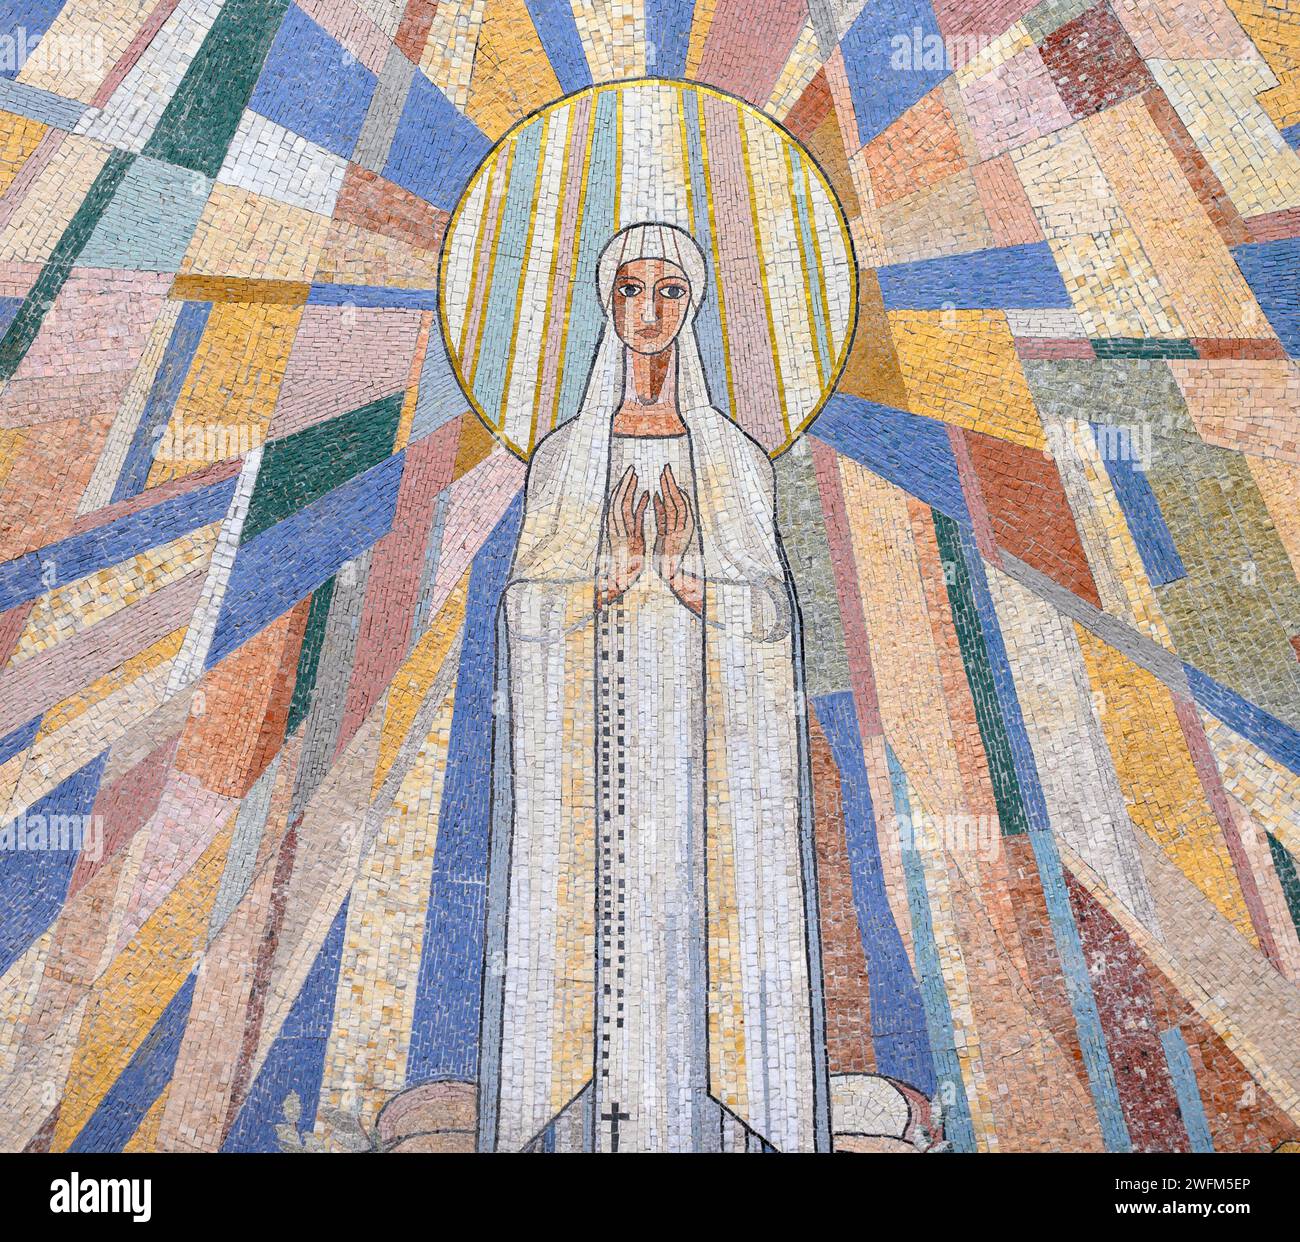 Our Lady of Fatima. A mosaic on the ceiling of St Stephen's Chapel in Fatima, Portugal. Stock Photo